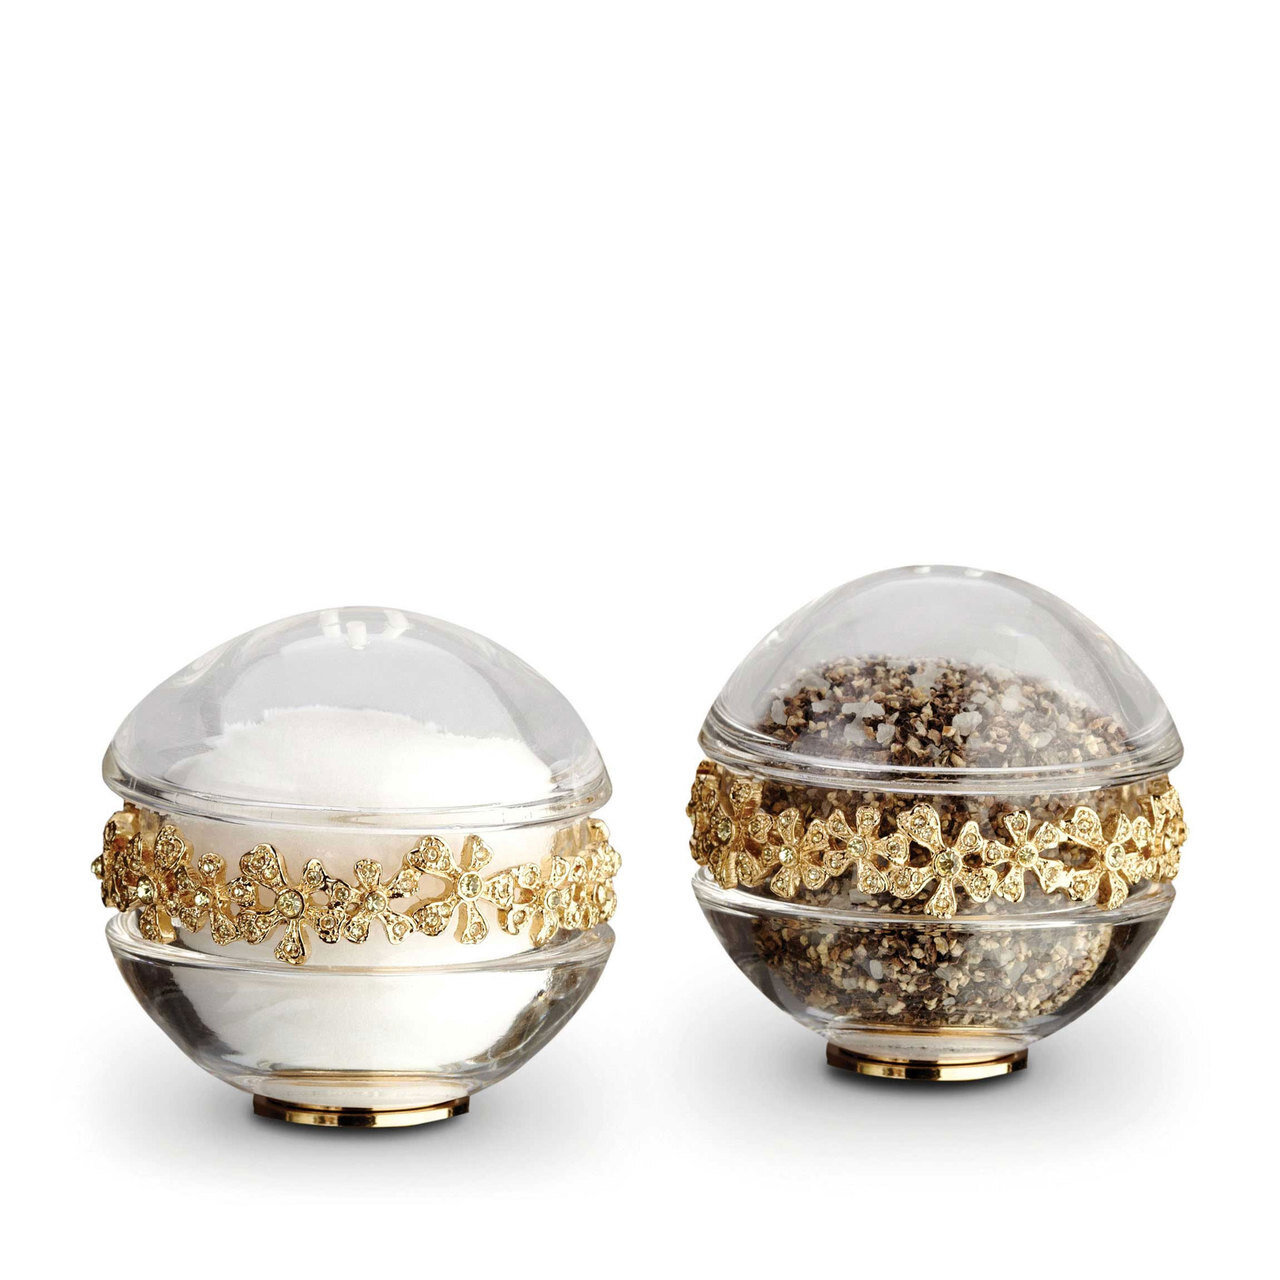 L'Objet Gold with Yellow Crystals Salt and Pepper Shaker Garland Spice Jewels